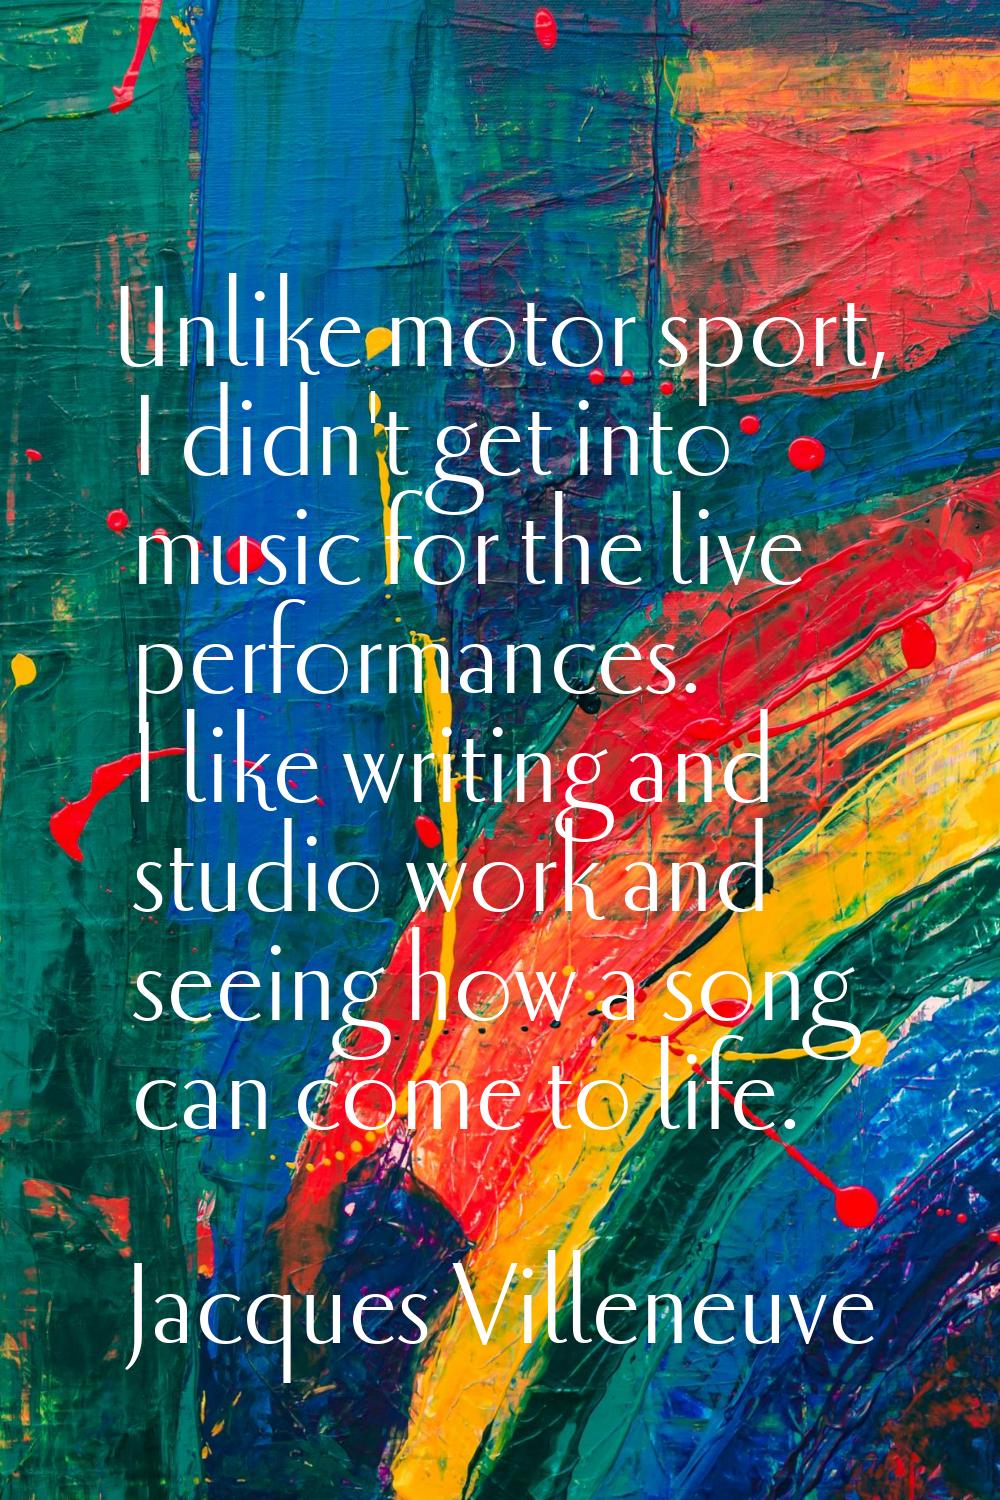 Unlike motor sport, I didn't get into music for the live performances. I like writing and studio wo